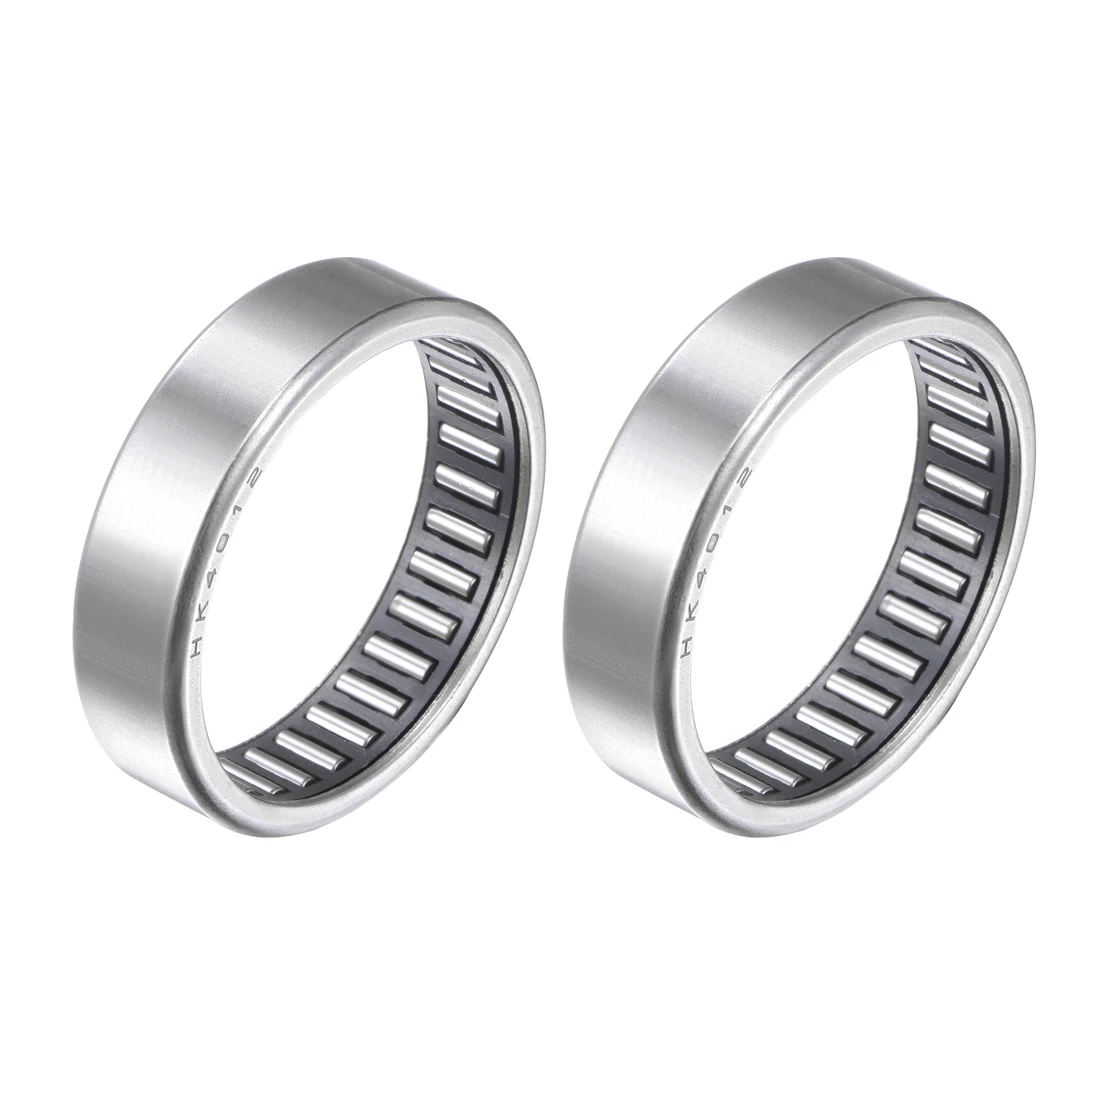 

Uxcell 2pcs HK4012 Drawn Cup Needle Roller Bearings 40mm Bore, 47mm OD, 12mm Width